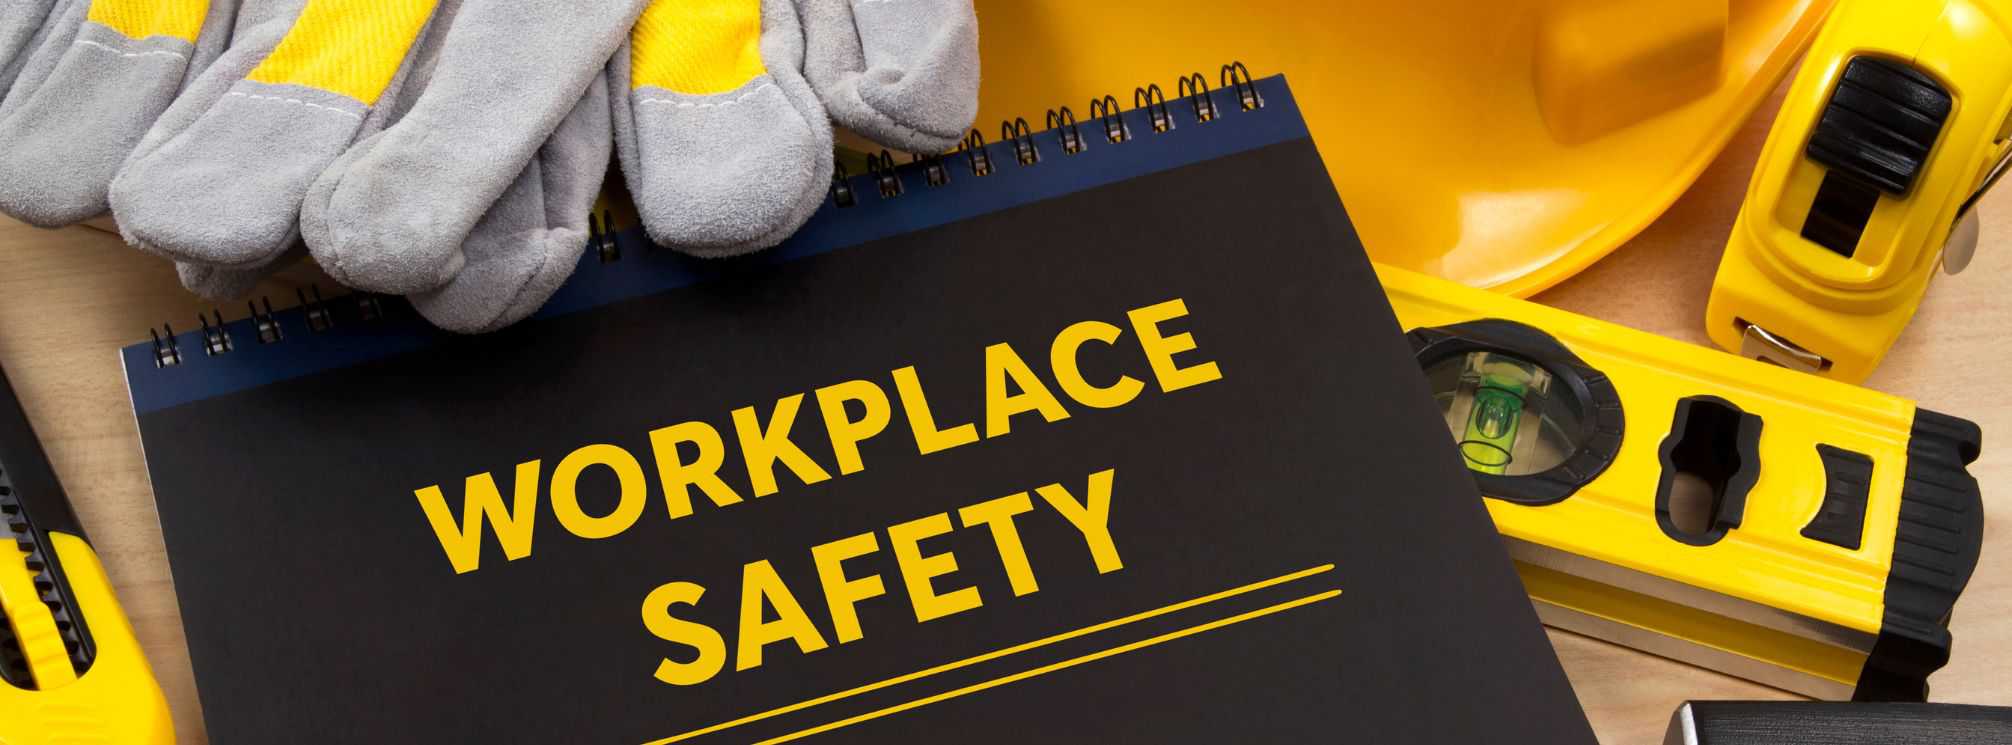 Workplace safety tips manual sitting on a pile of safety equipment like gloves and a level.